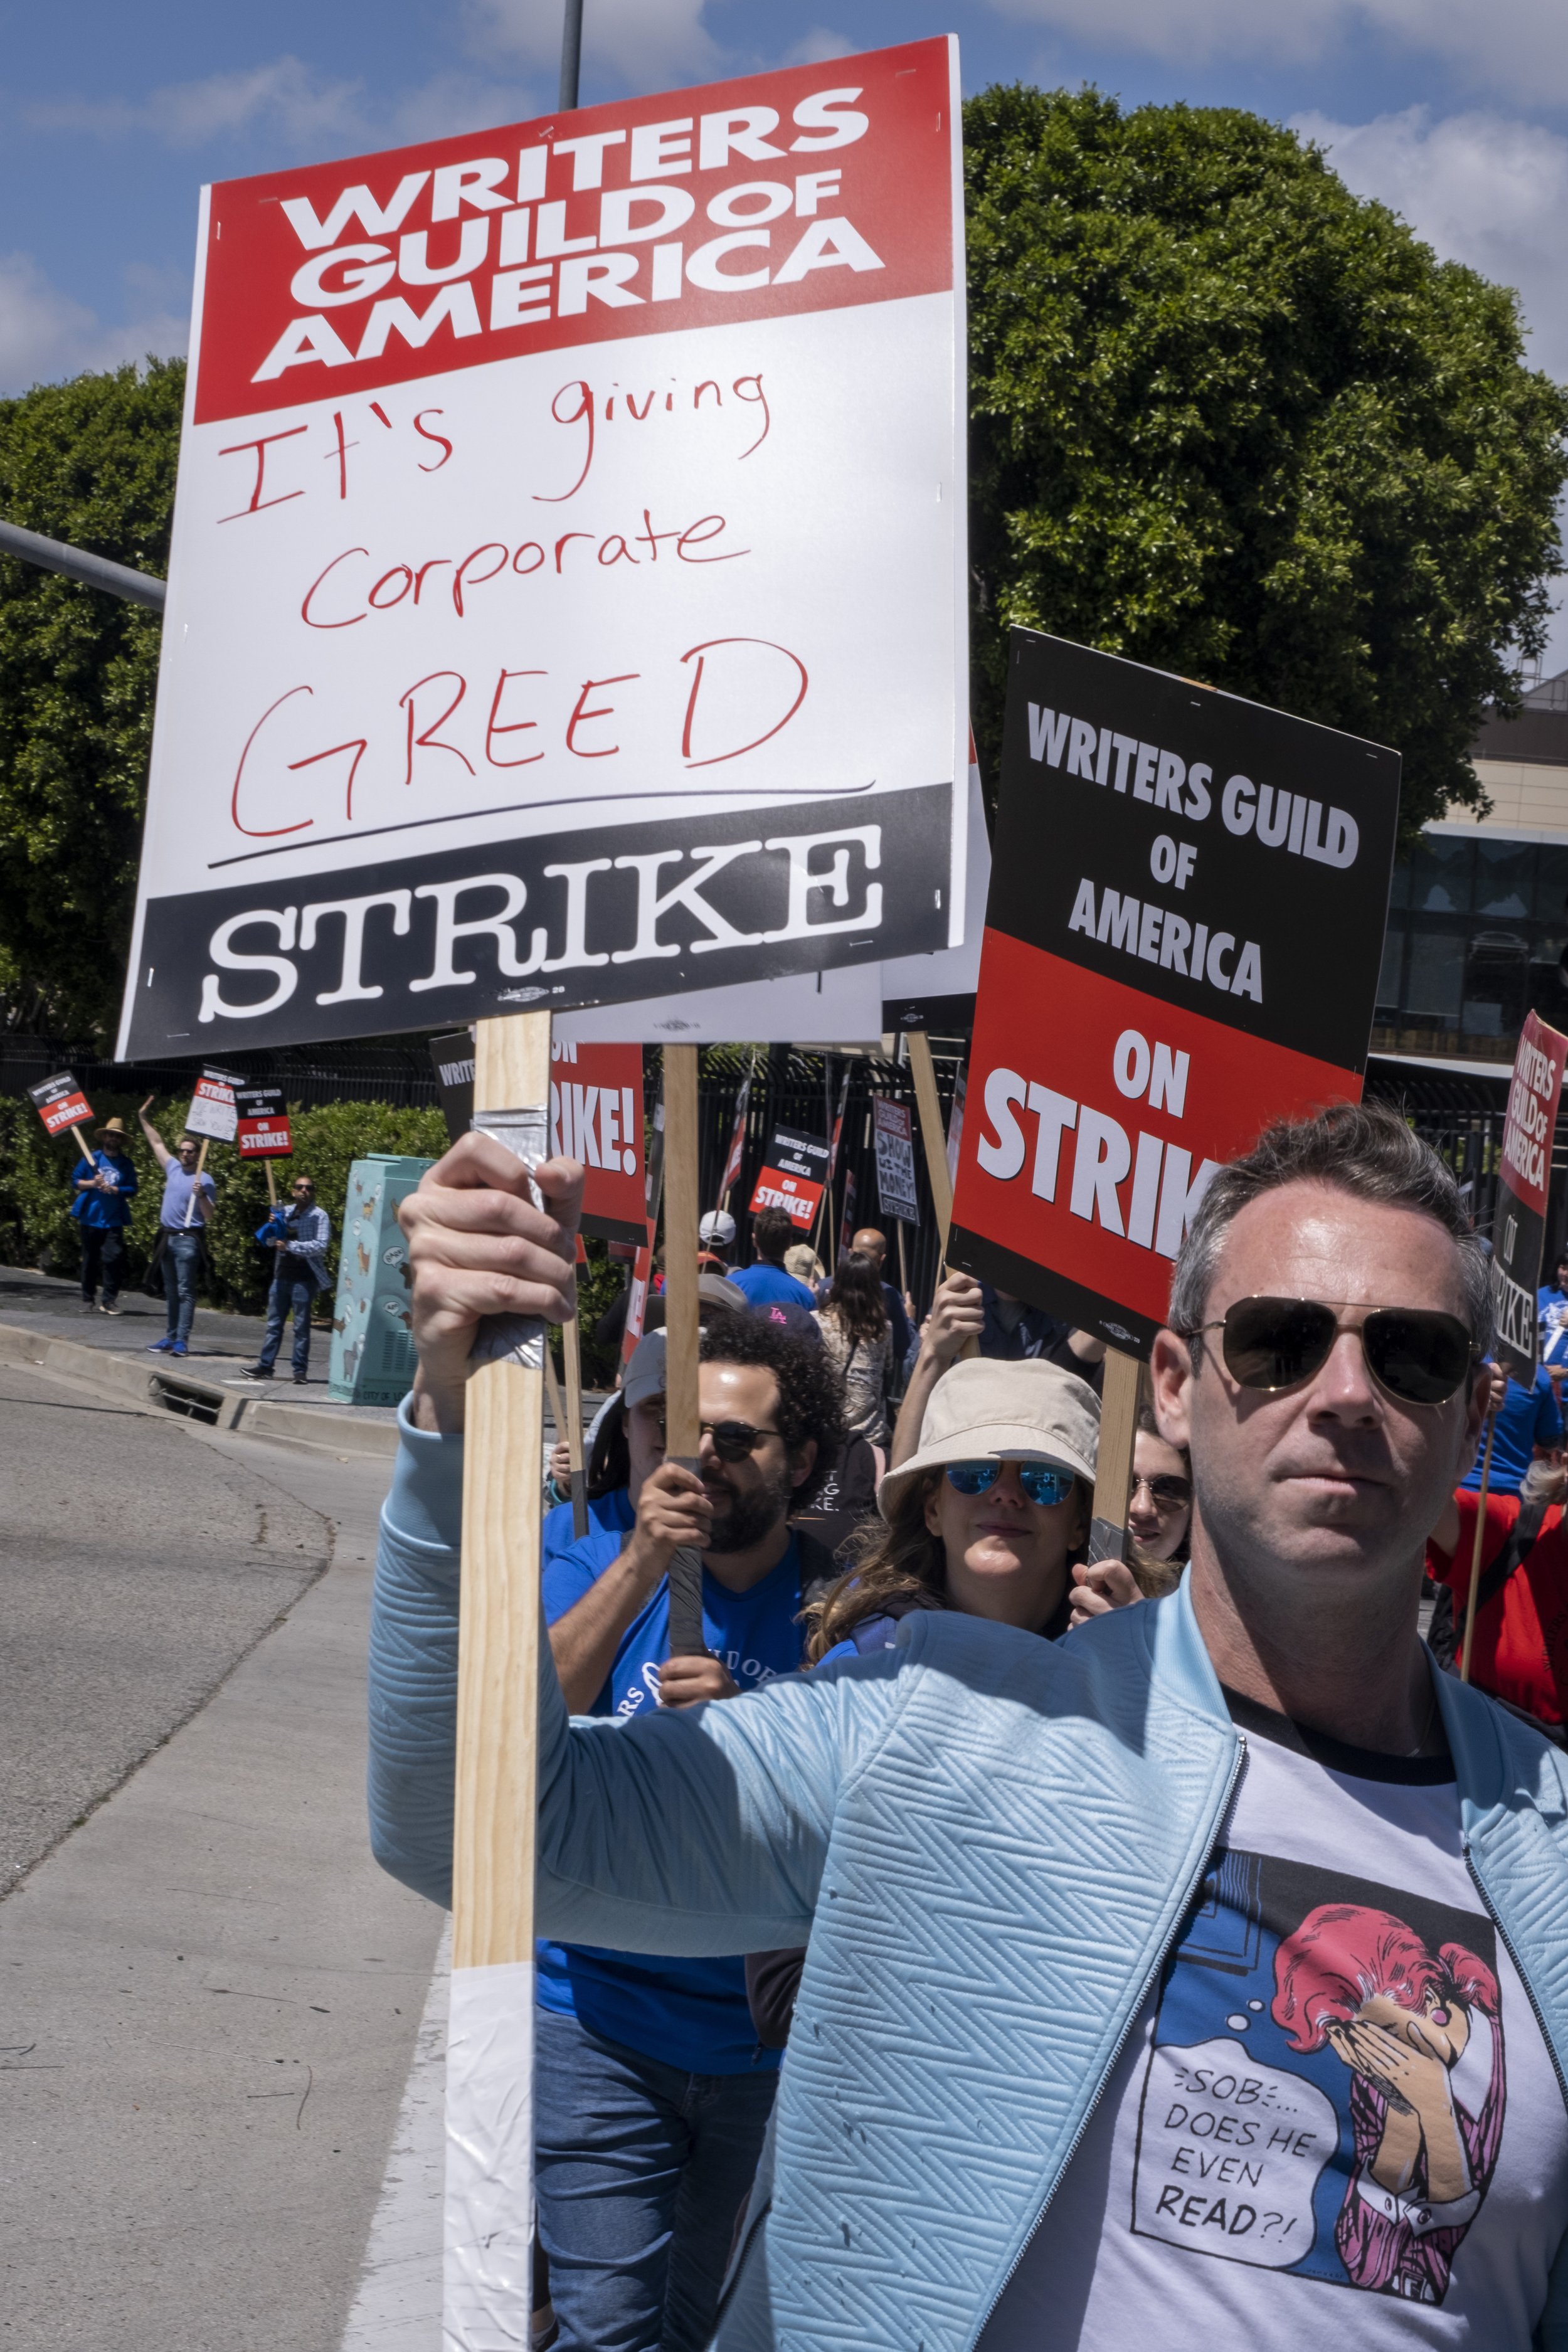  Writers Guild of America members picket in front of Universal Studios in Studio City, Calif. on Tuesday, May 2 following disagreements within negotiations between the Alliance of Motion Pictures and Television Producers. (Anna Sophia Moltke | The Co